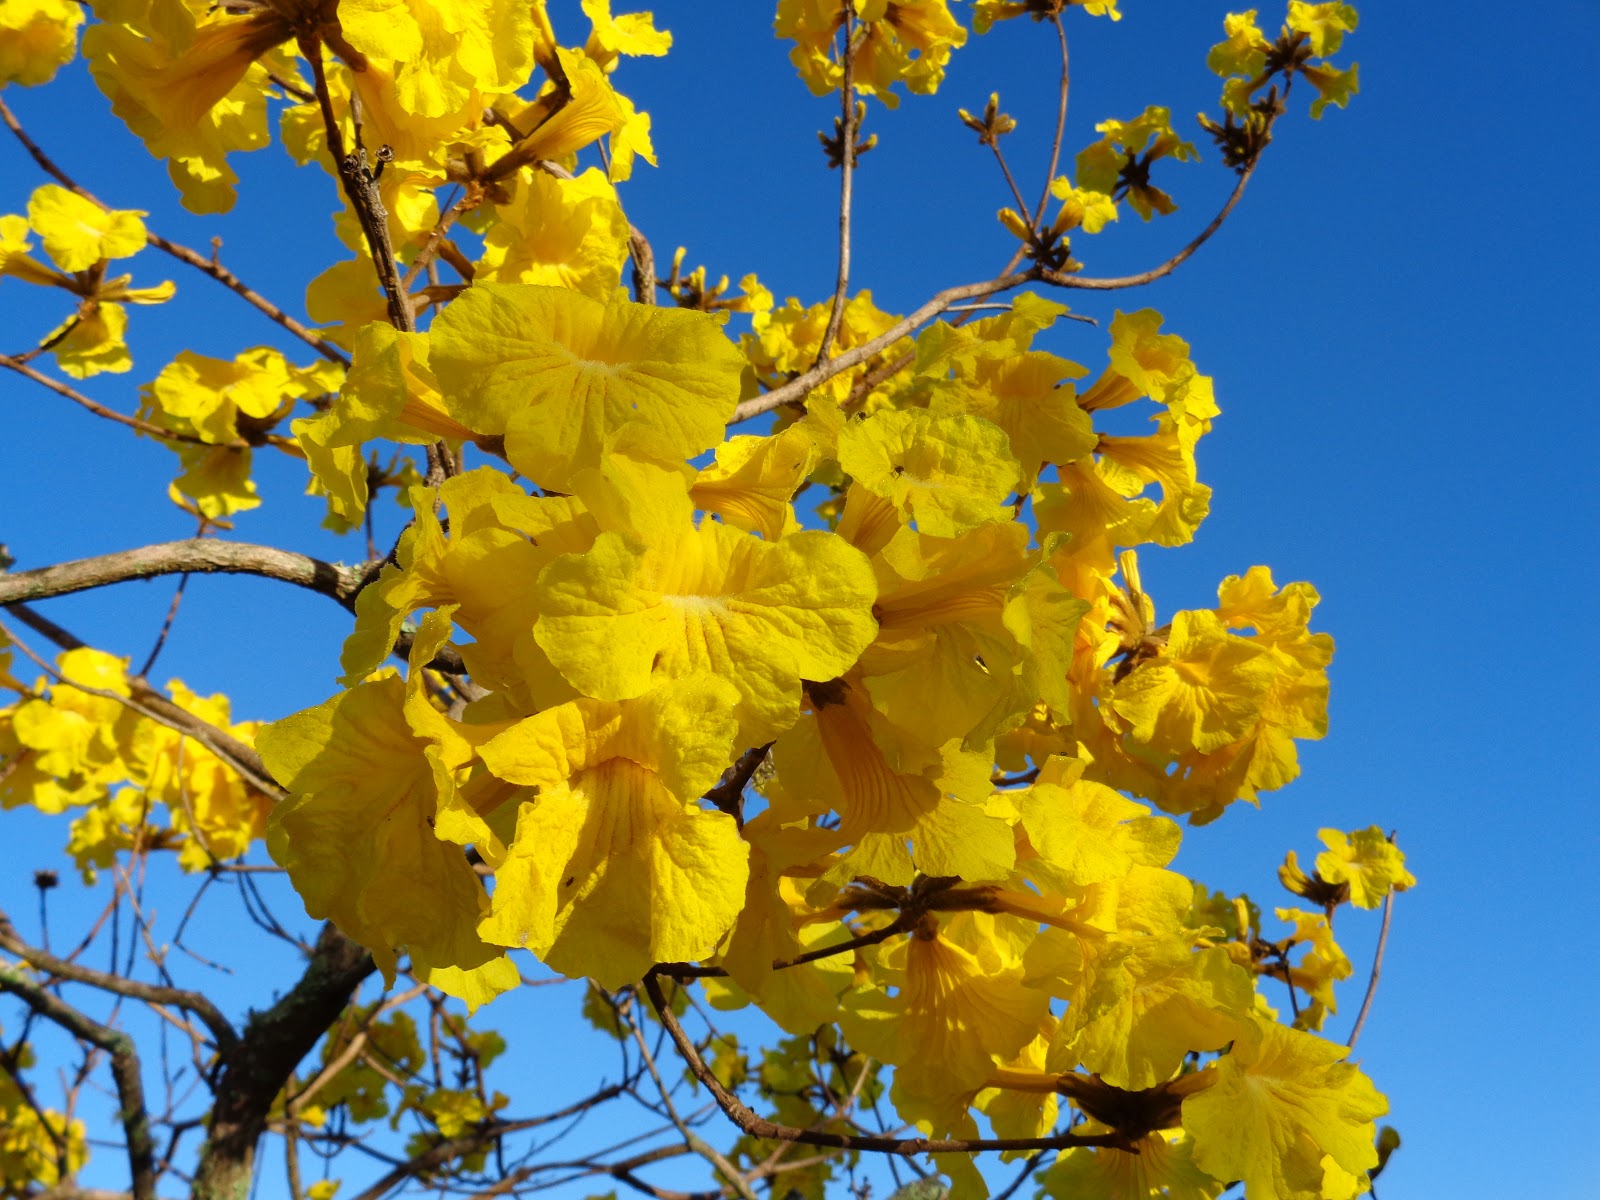 Blooms on a yellow trumpet tree. (Photo courtesy University of Florida)